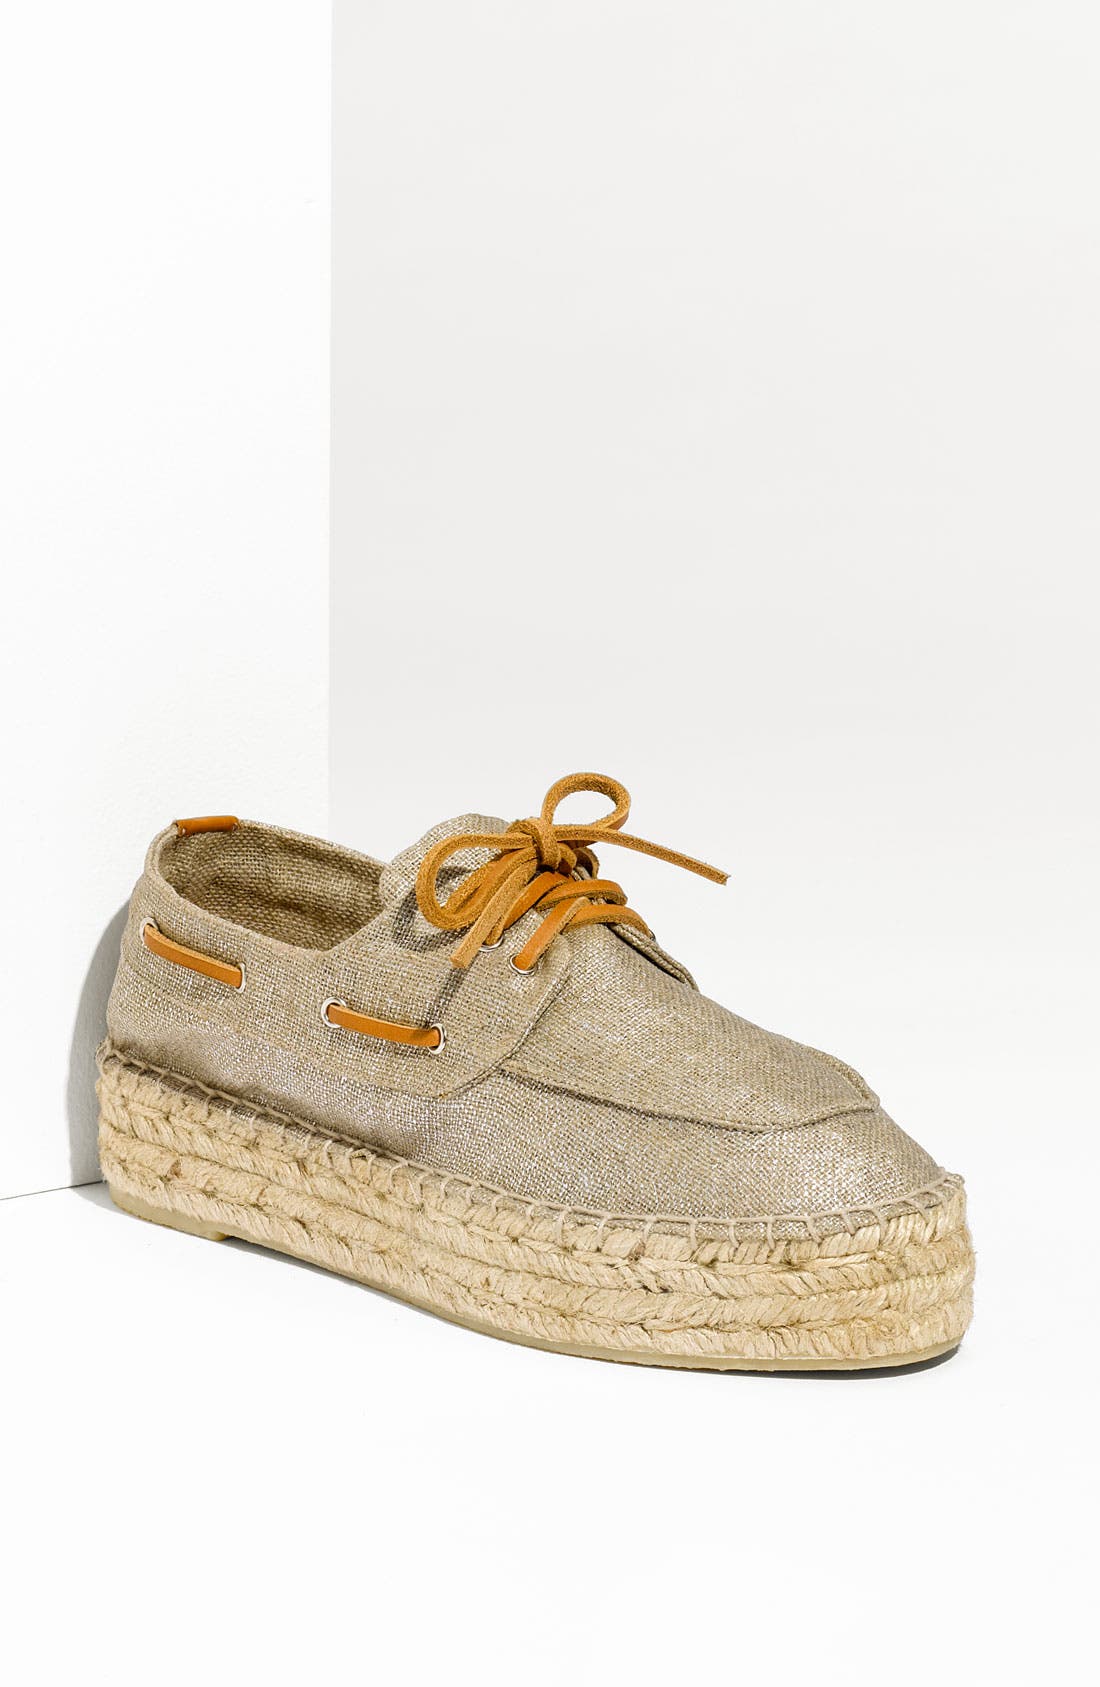 tory burch boat shoes